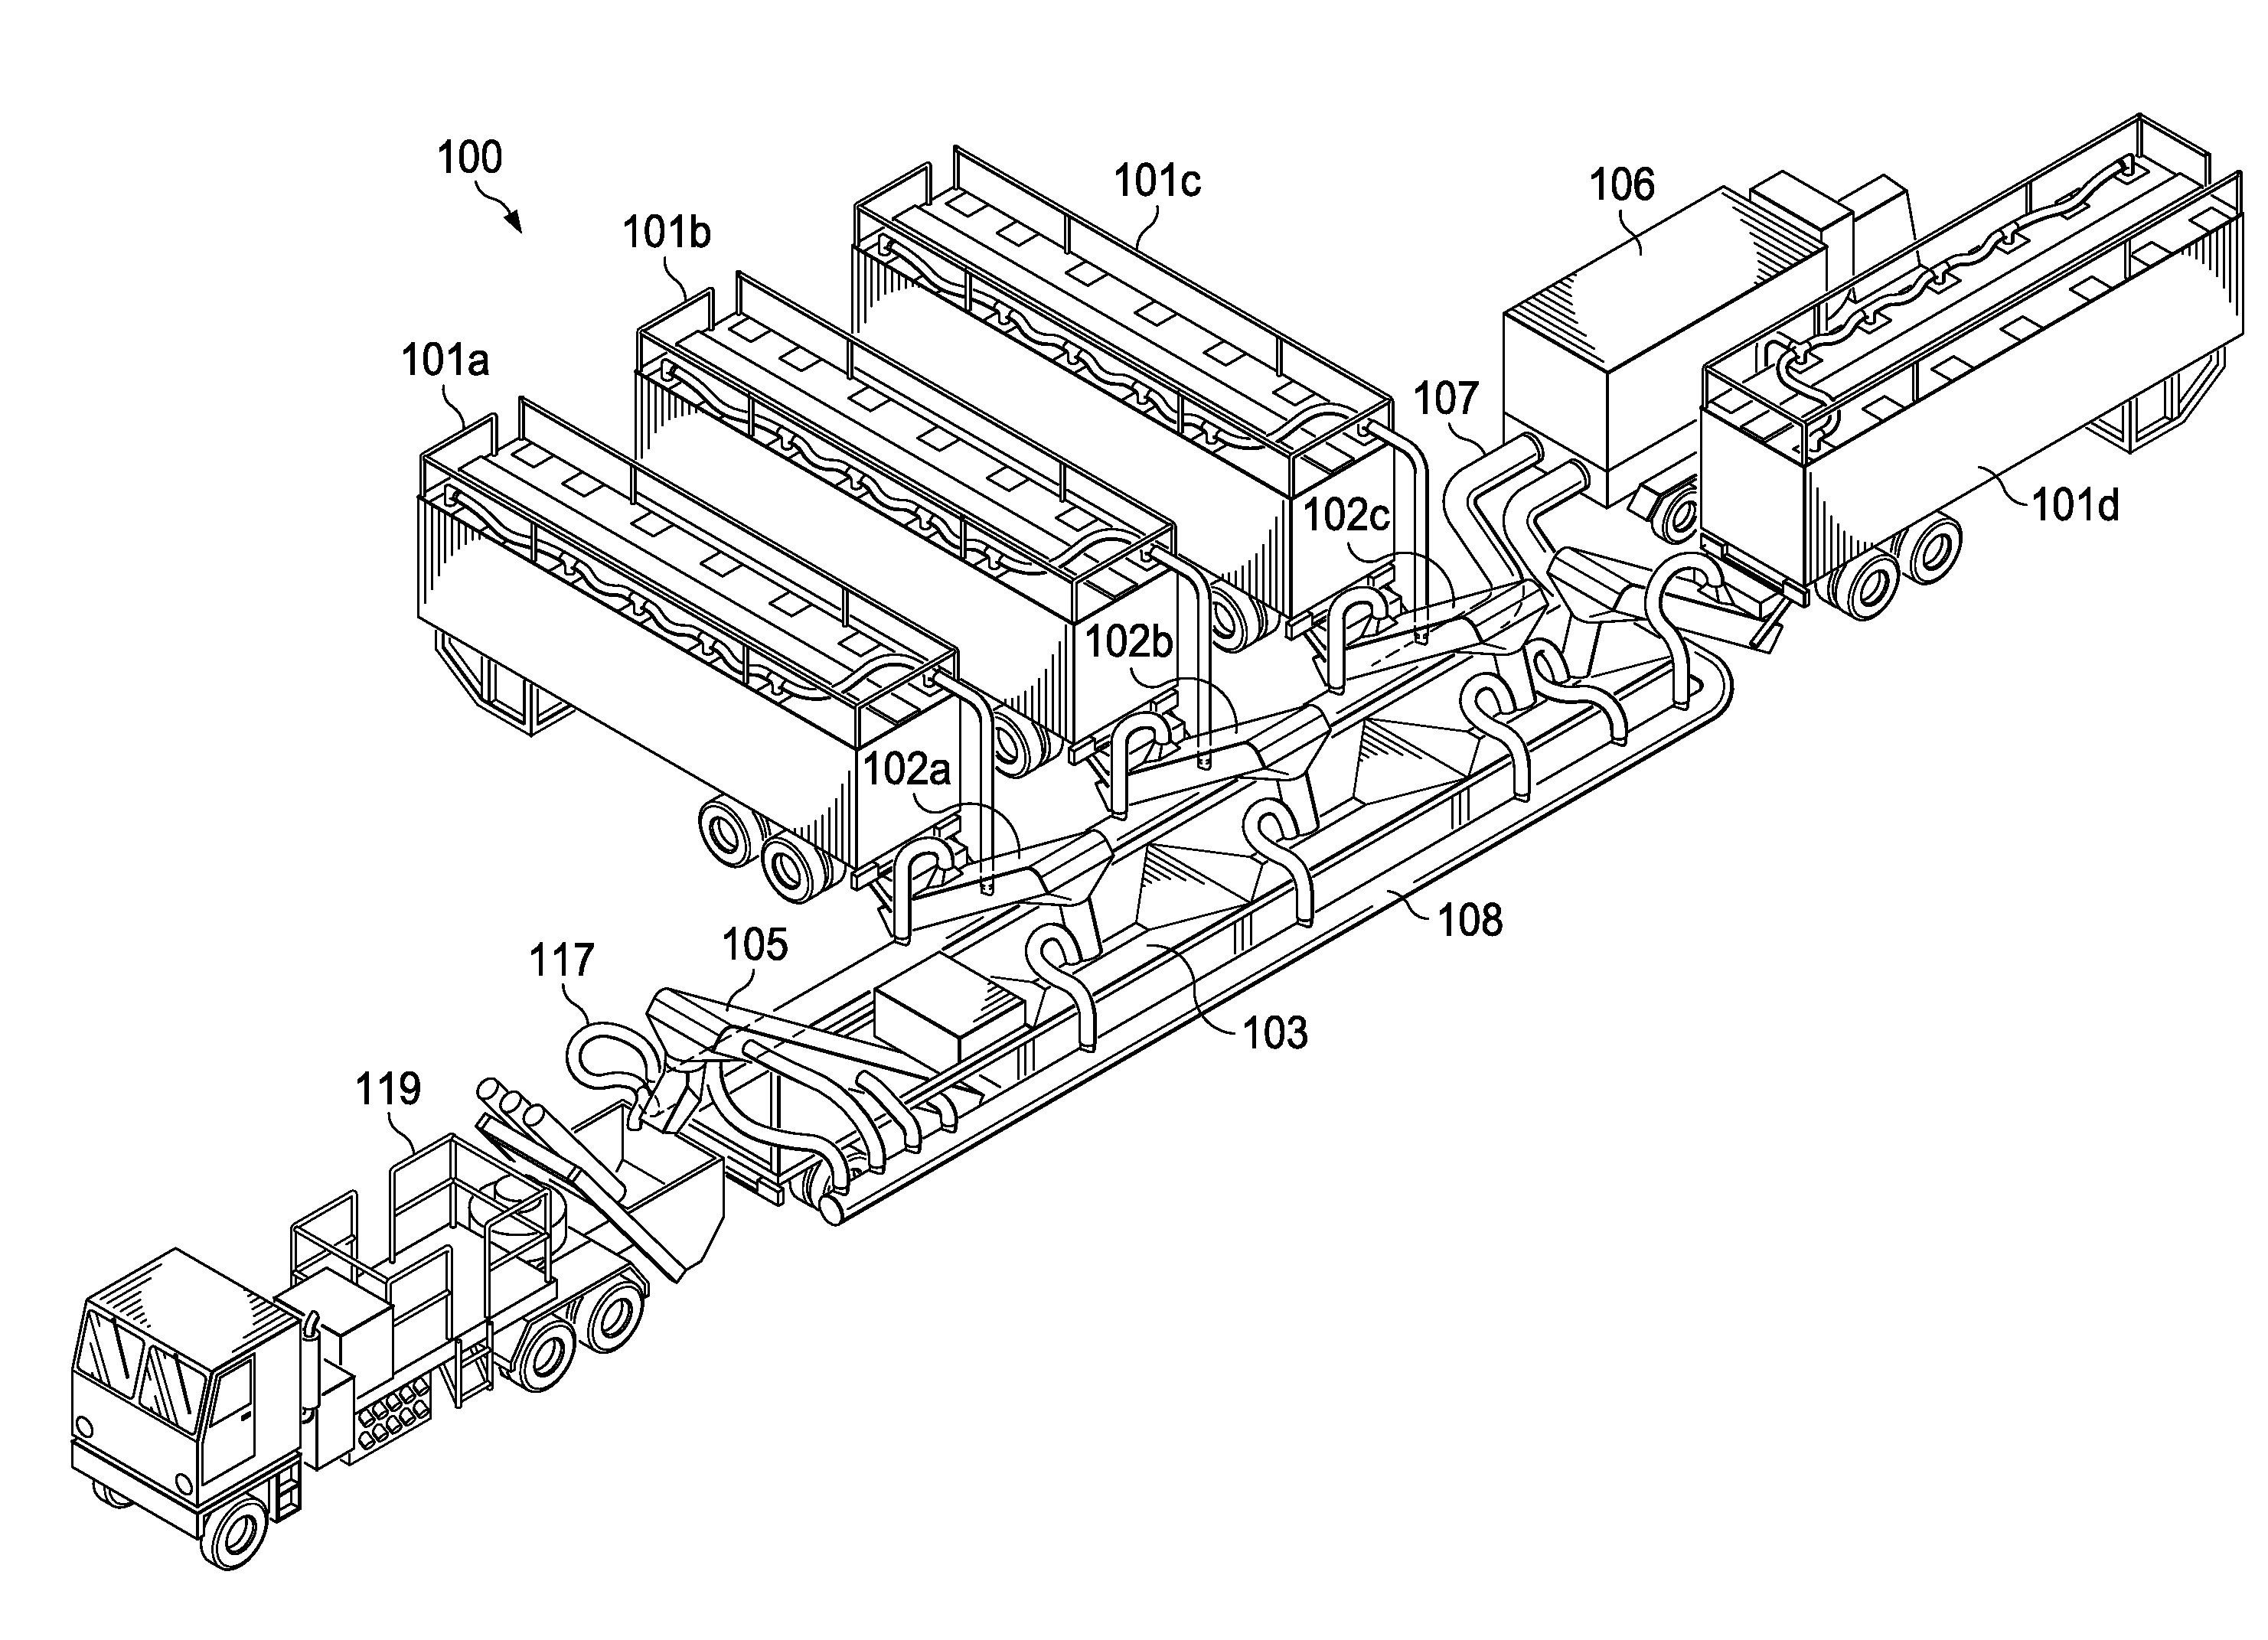 Systems and methods for controlling silica dust during hydraulic fracturing operations